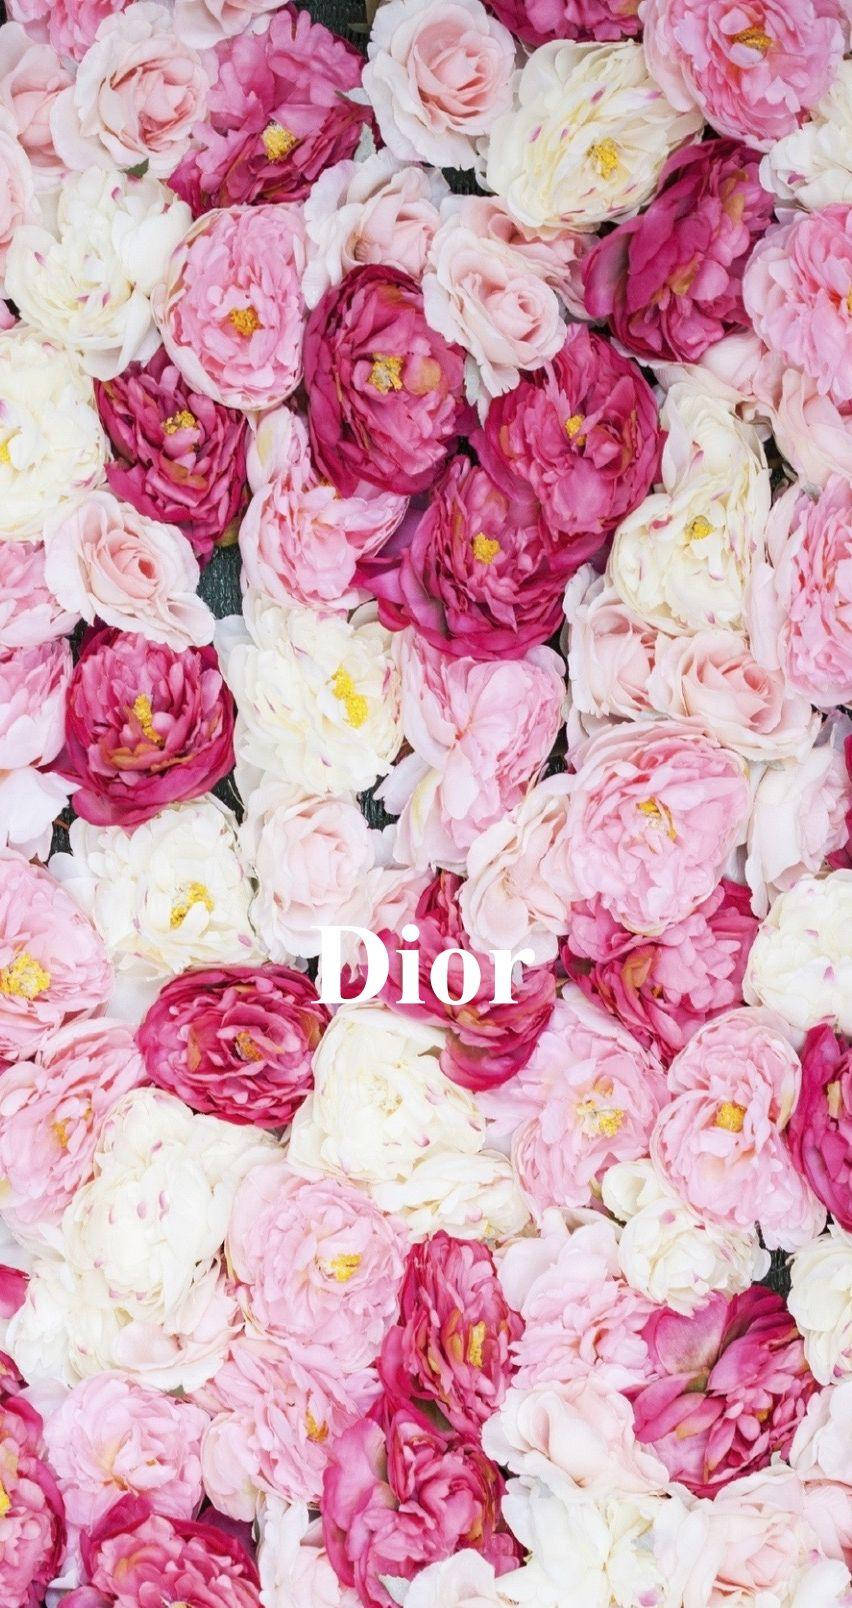 Dior 852X1608 Wallpaper and Background Image